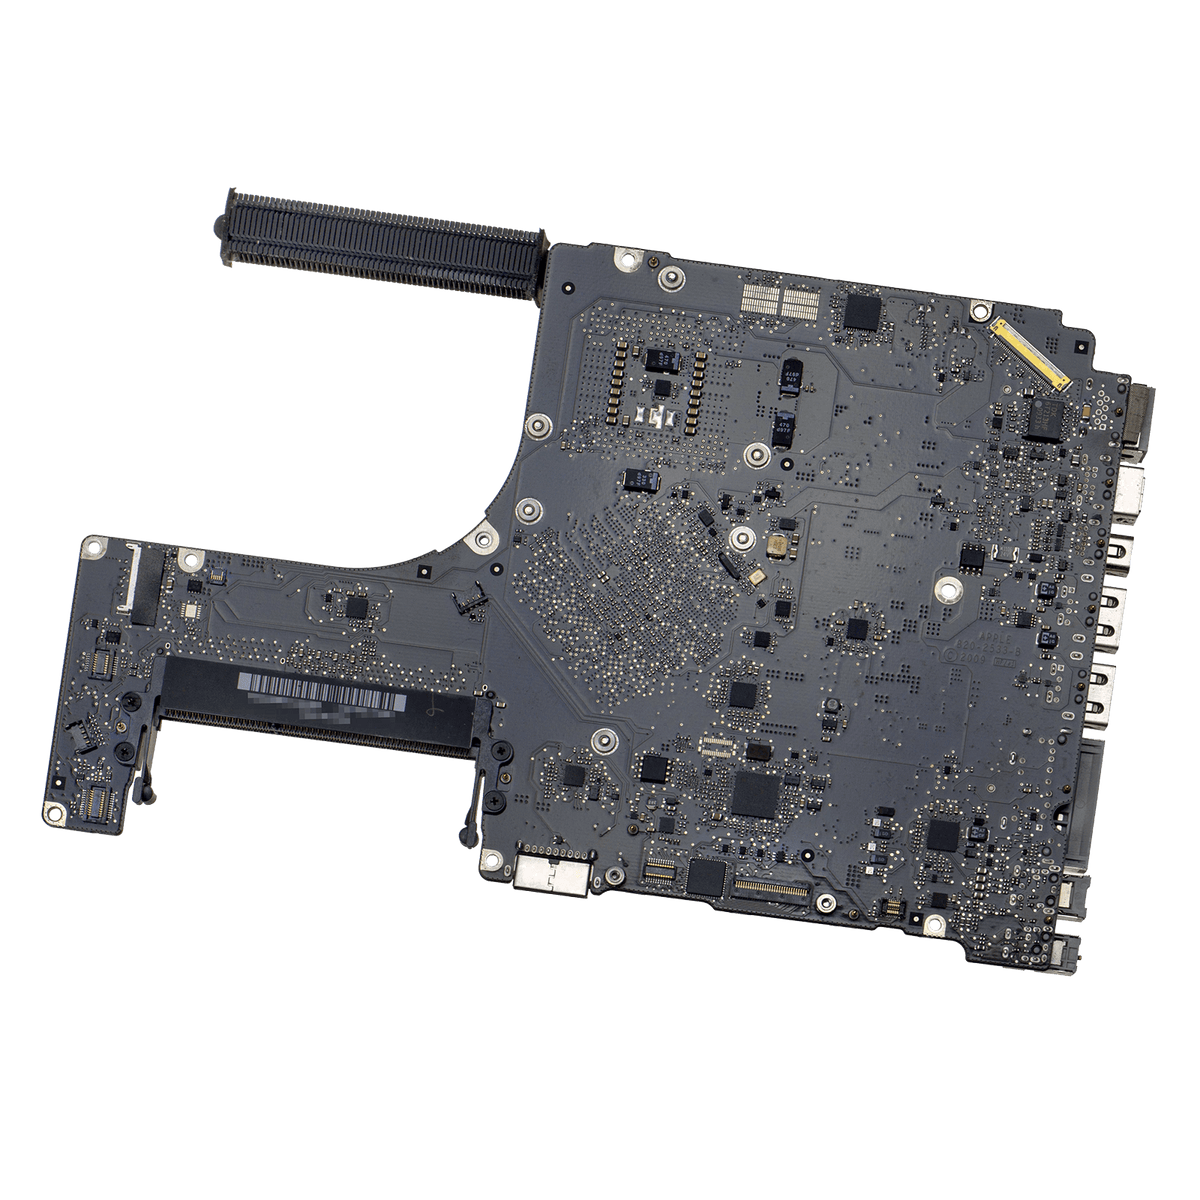 MOTHERBOARD 2.53GHz FOR MACBOOK PRO 15" A1286 (MID 2009)